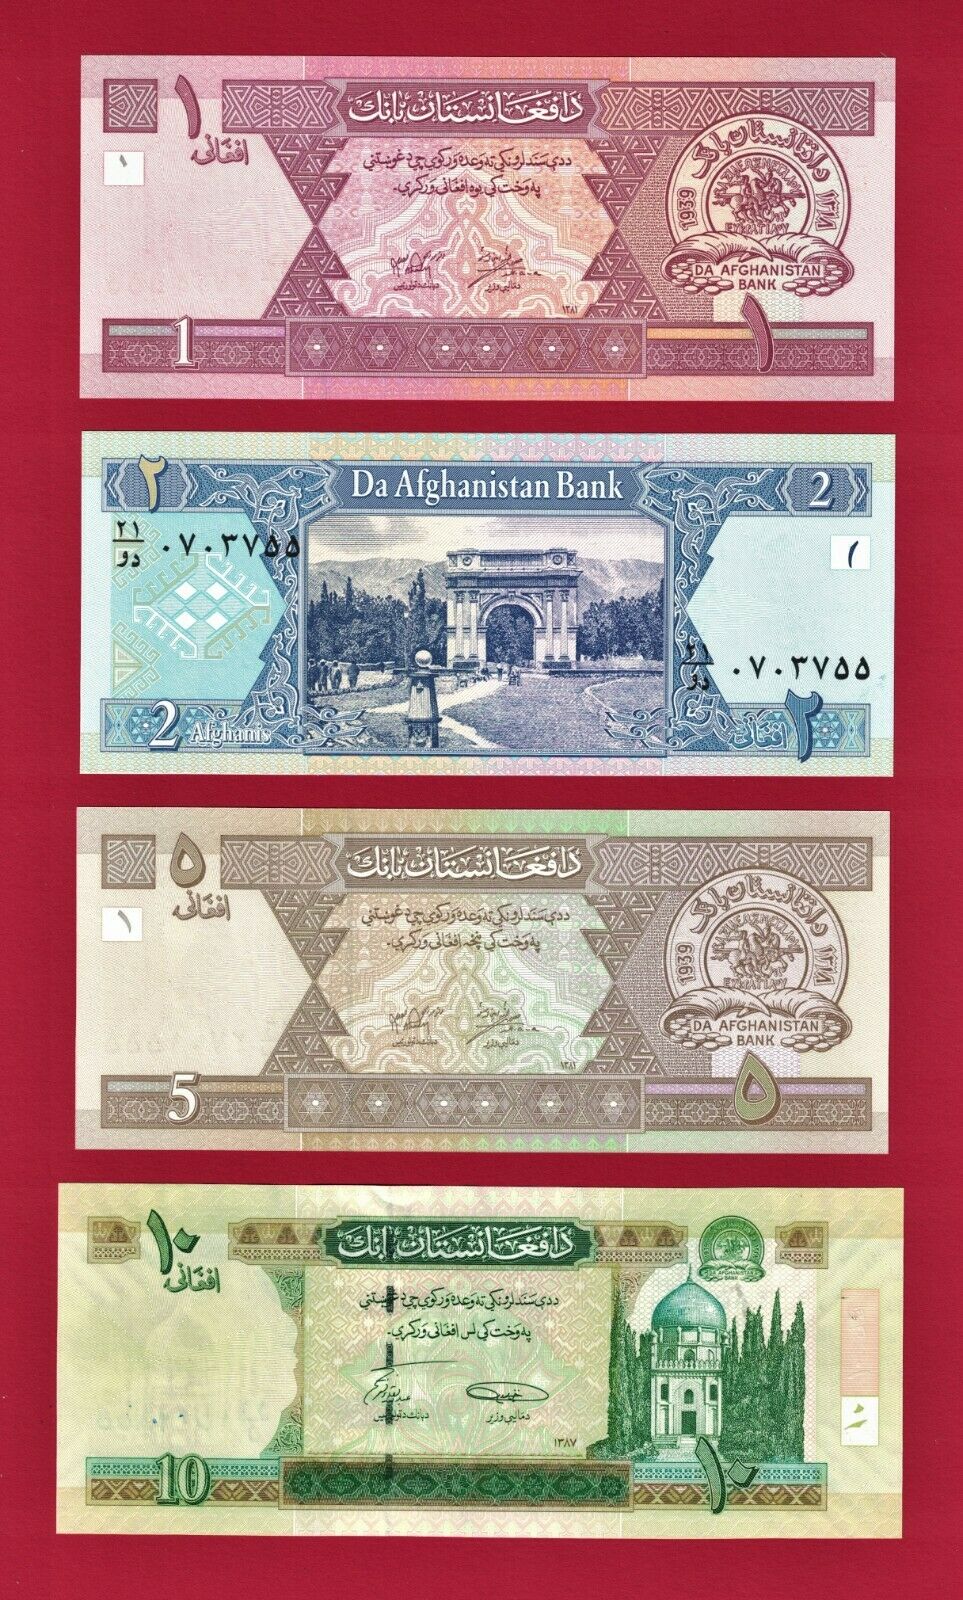 Afghanistan Unc 2002 Afghanis Notes 1 (p-64a), 2 (p-65a), 5 (p-66a), 10 (p-67aa)